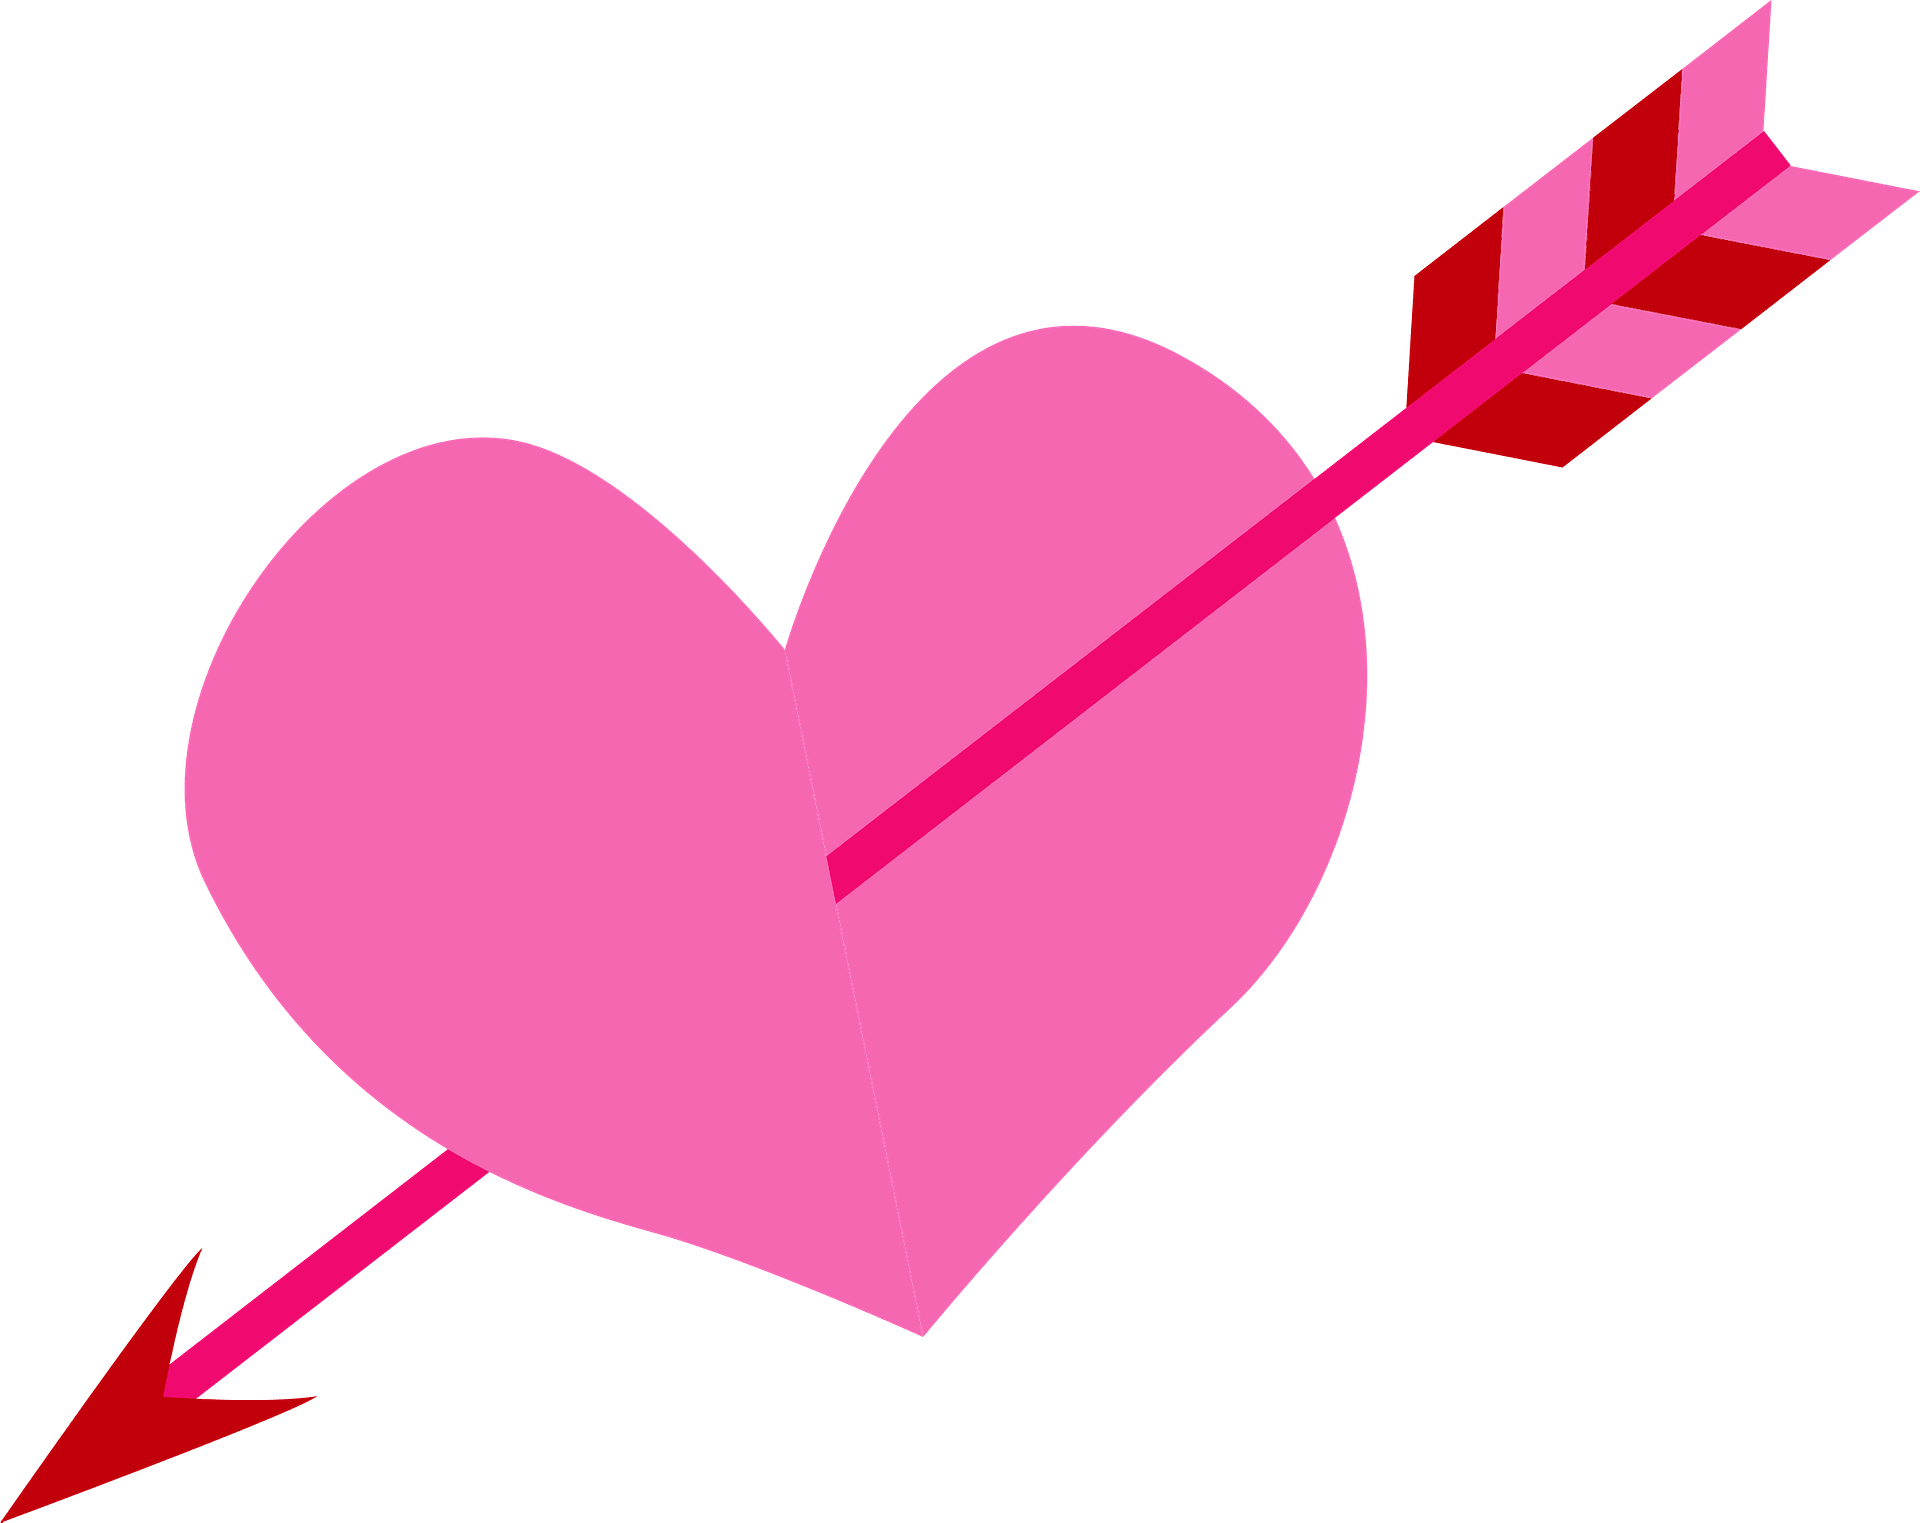 Heart Love Arrow Download Free Image PNG Image